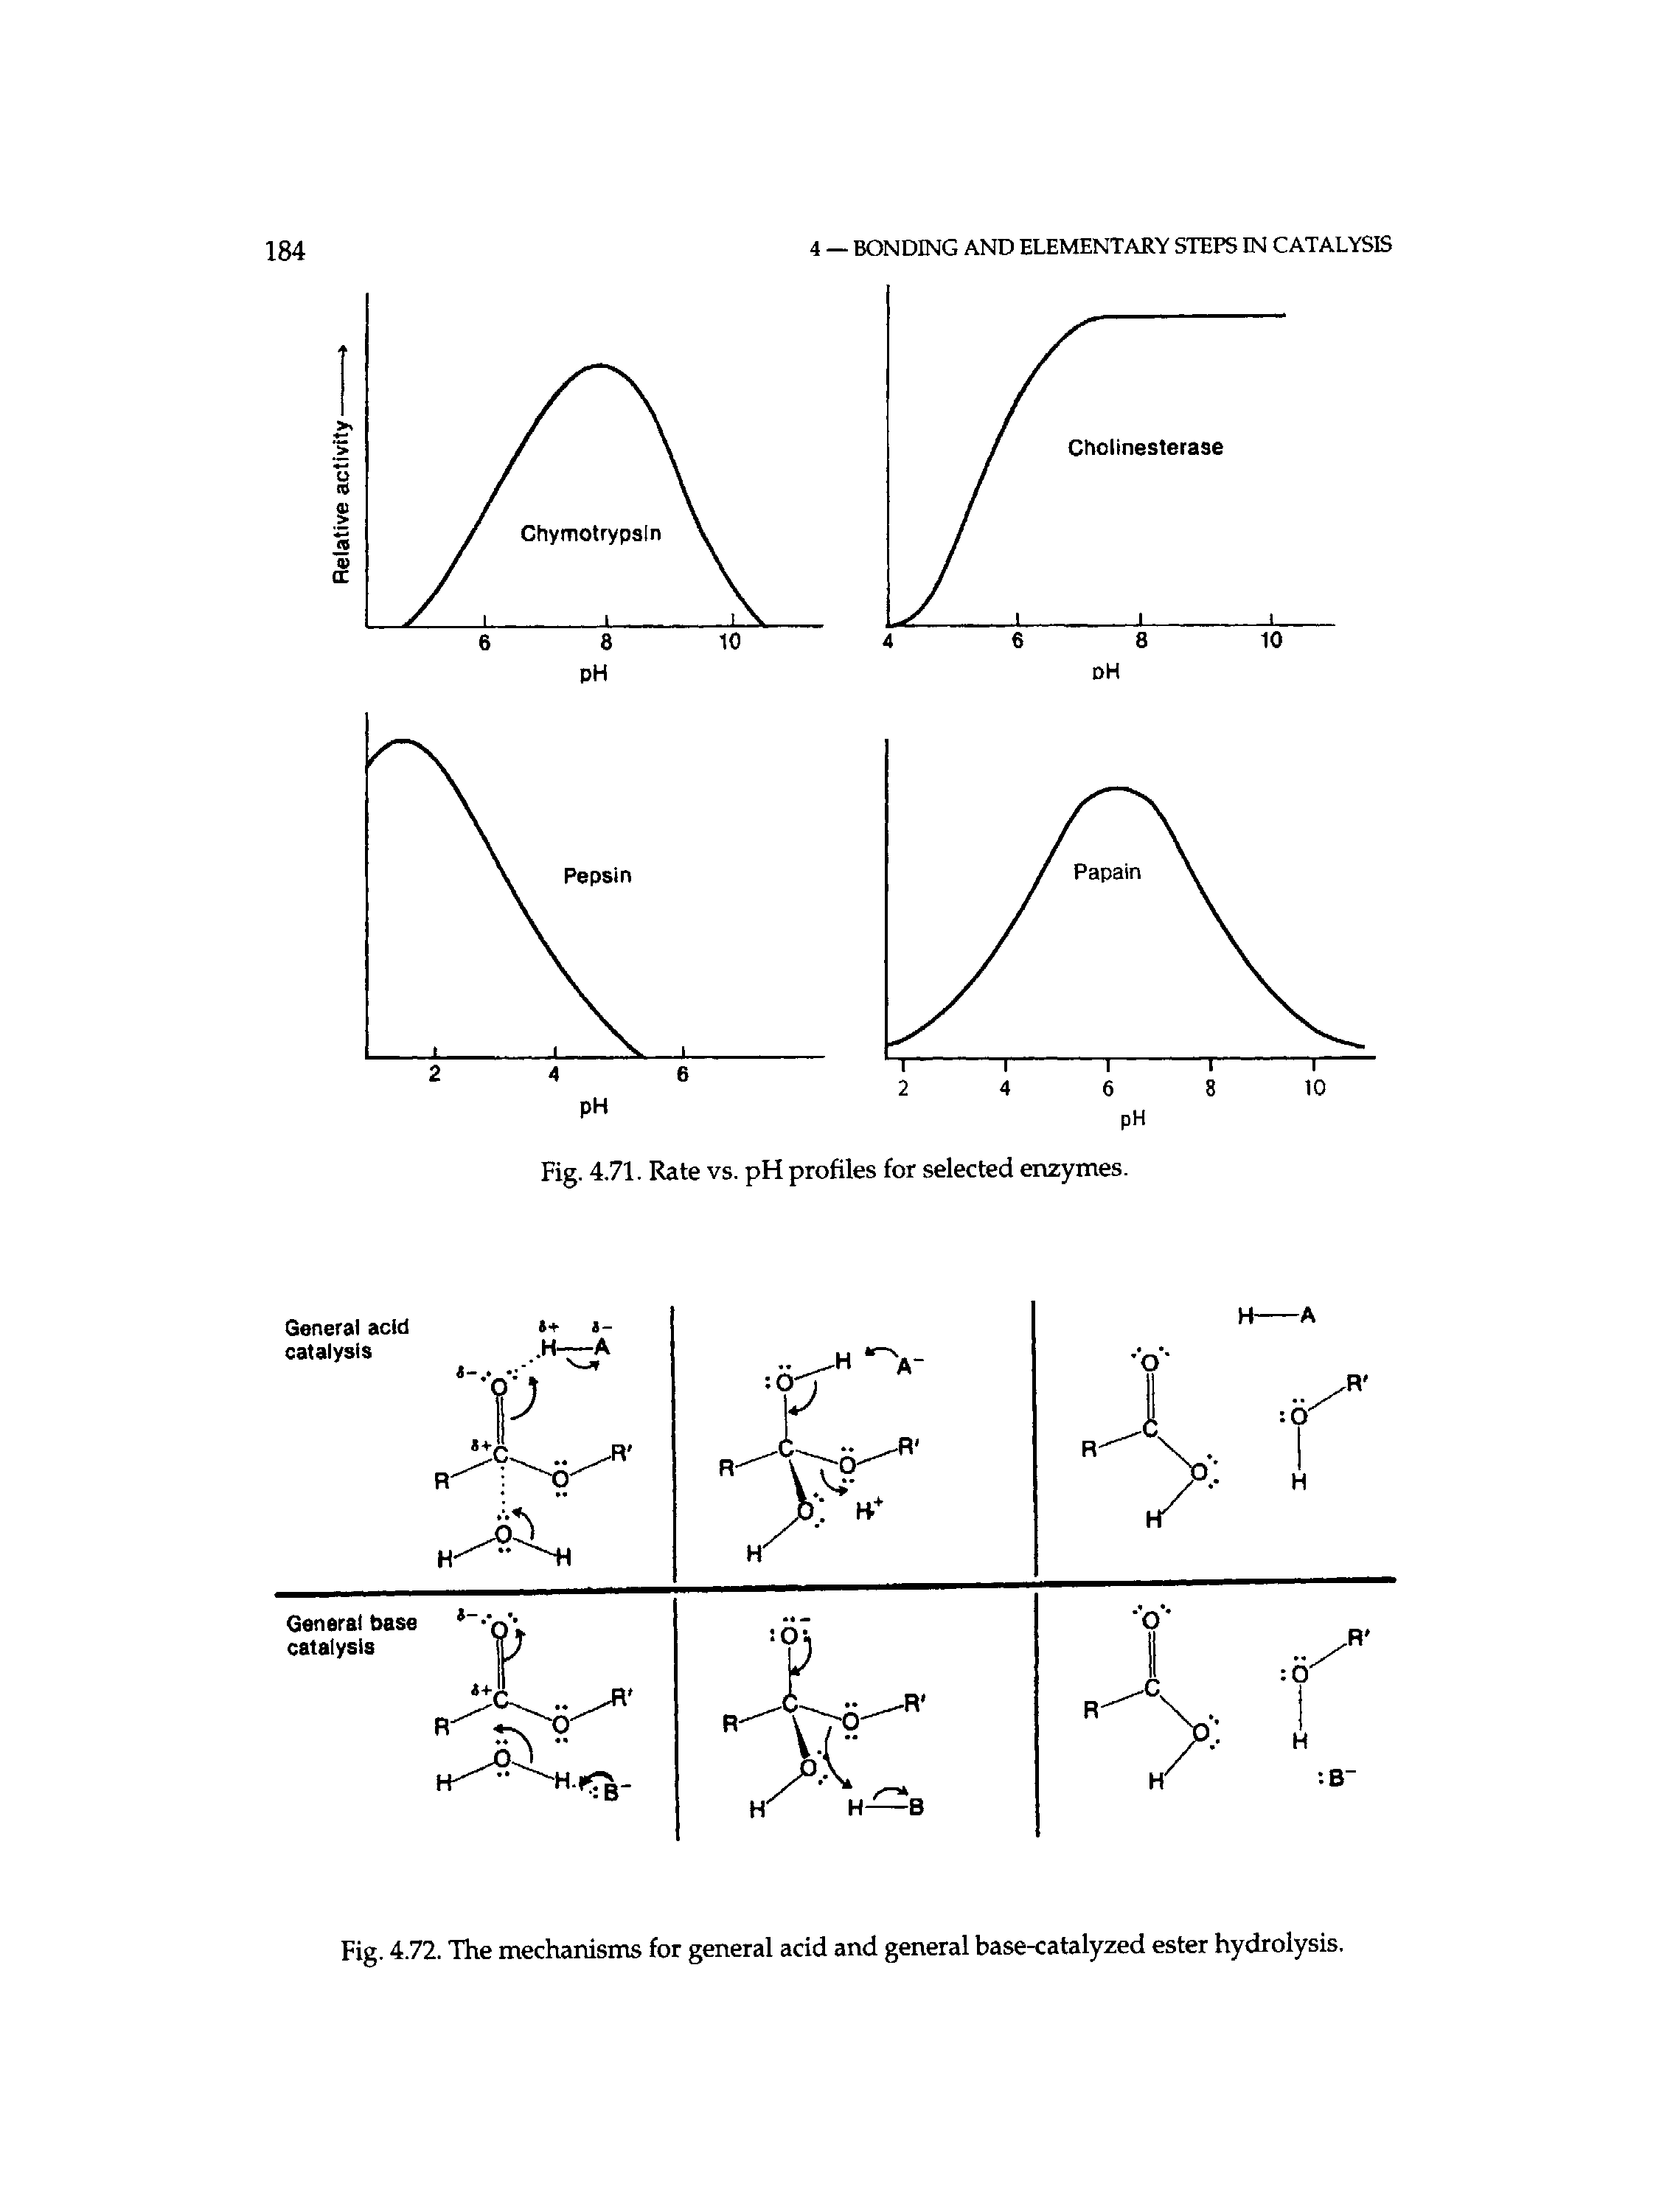 Fig. 4.72. The mechanisms for general acid and general base-catalyzed ester hydrolysis.